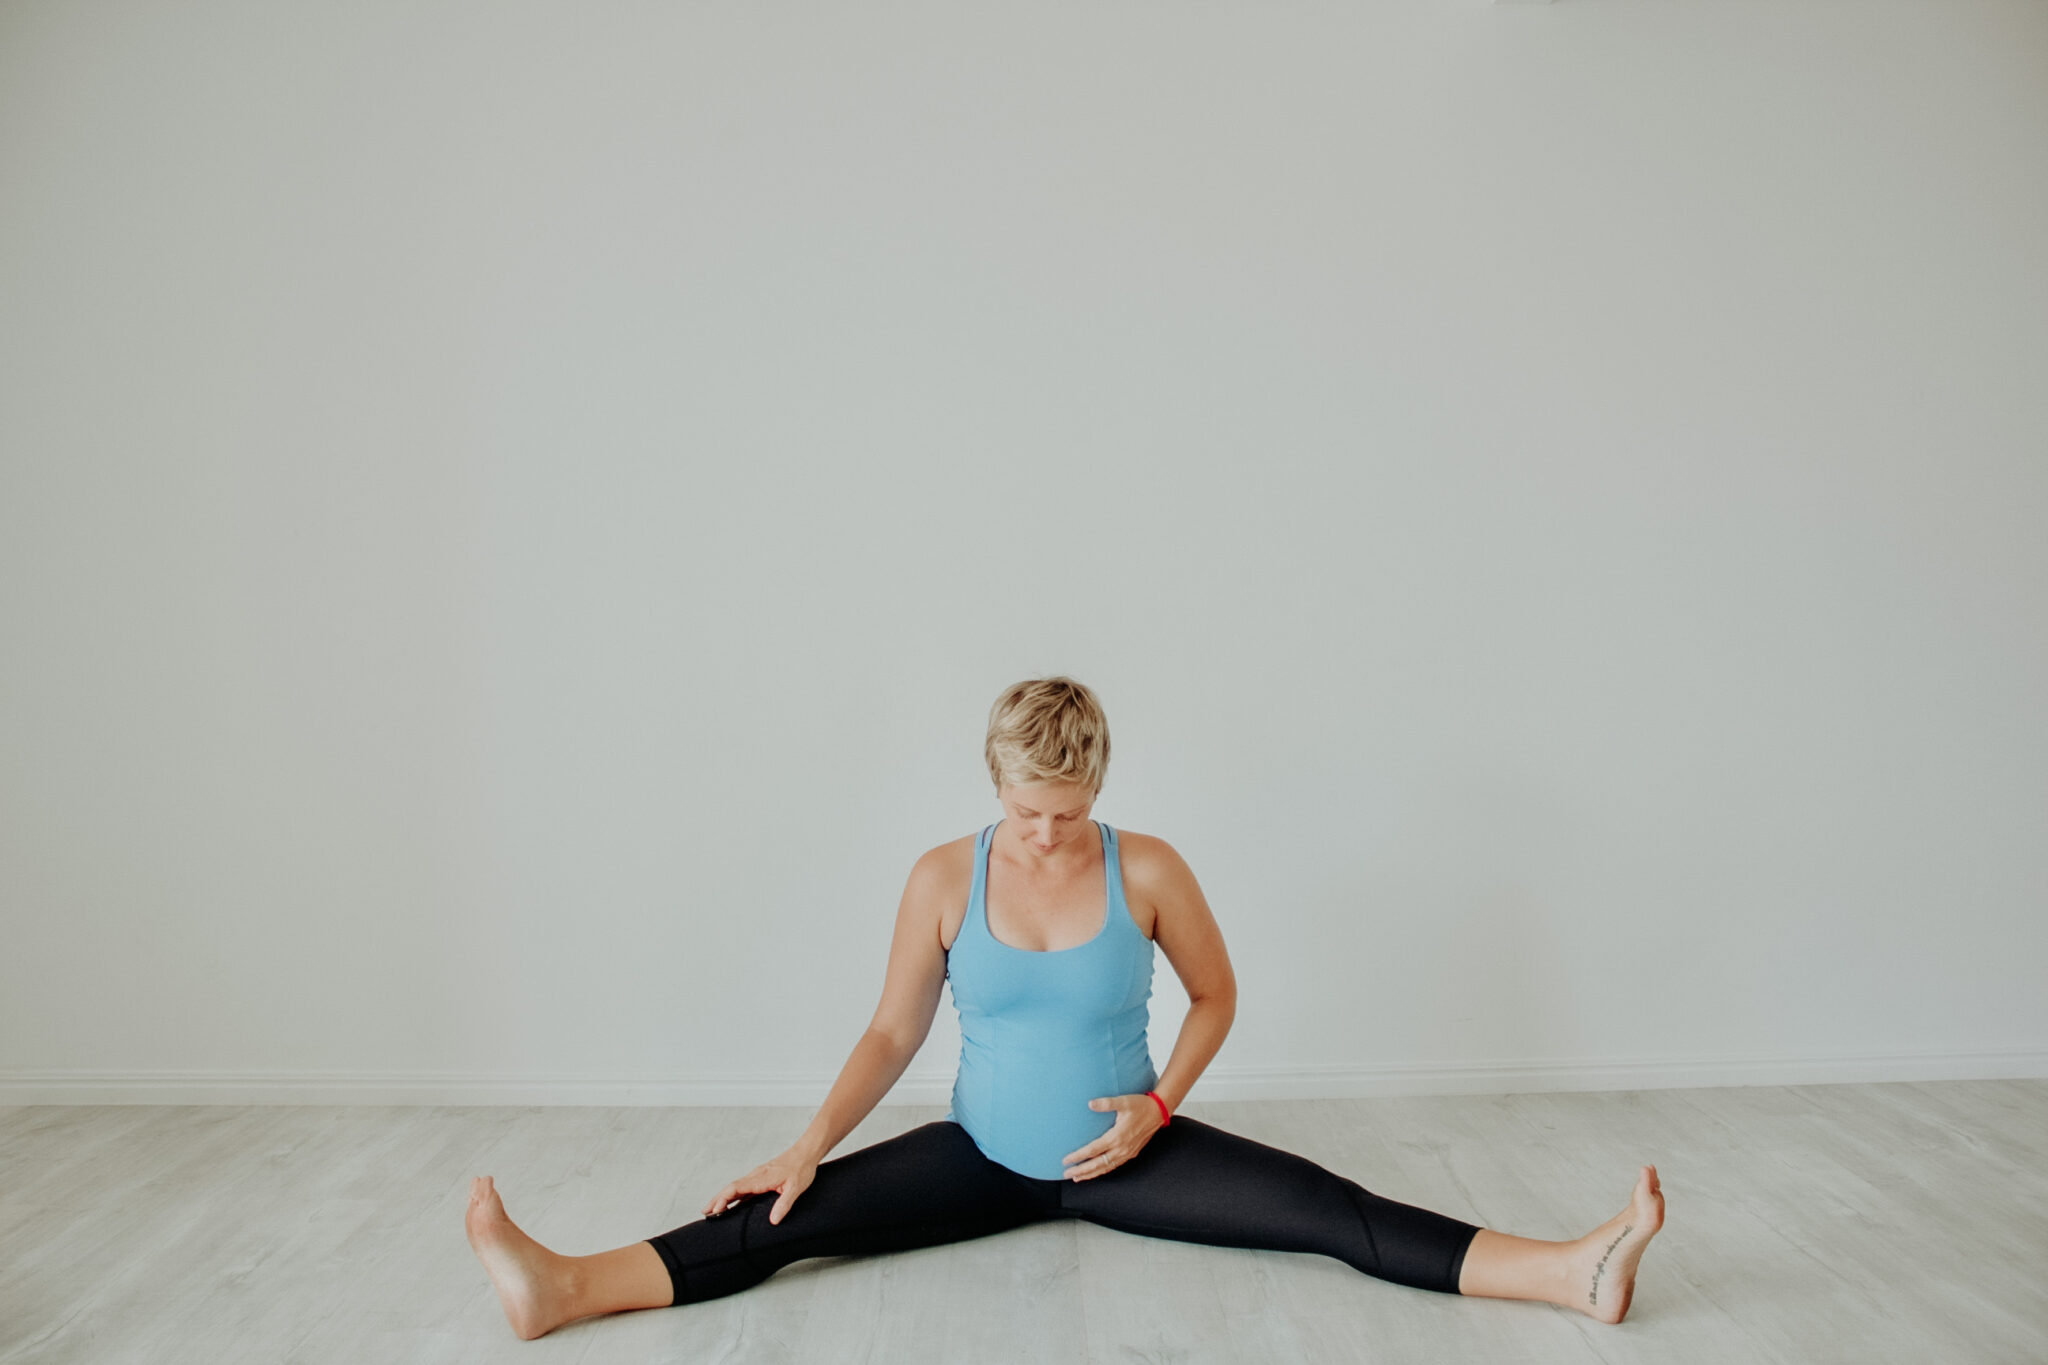 Third Trimester Prenatal Yoga for an Easier Labor and Delivery